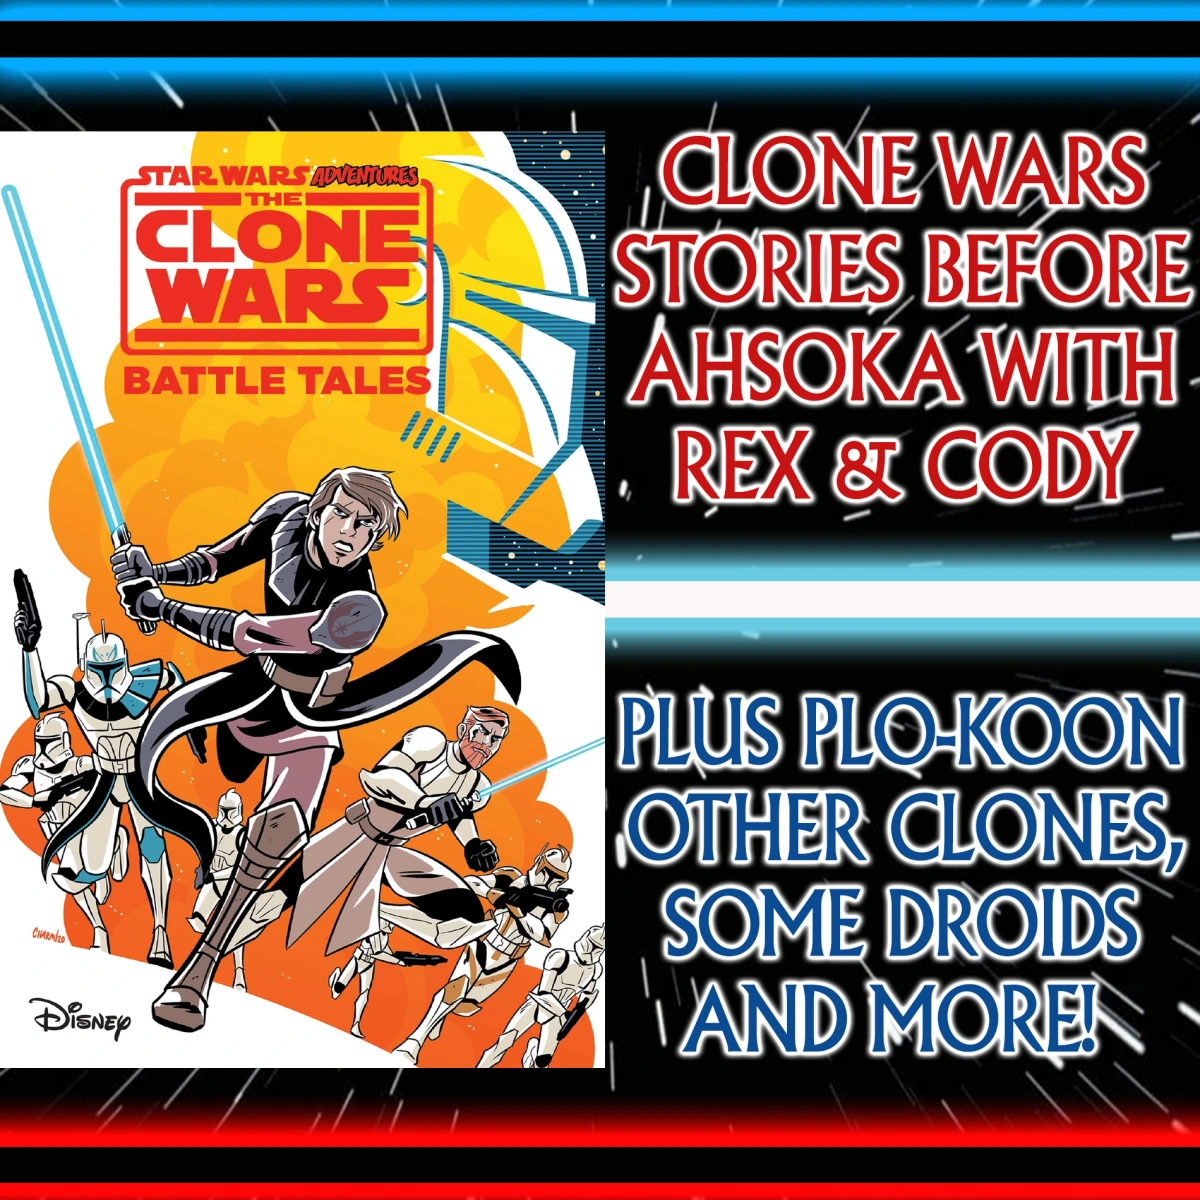 Star Wars: Comics In Canon – Clone Wars Battle Tales: Stories Before Ahsoka, With Rex, Cody & Several Clones, Plo-Koon, Numerous Droids & More (IDW Publishing) – Ep 141